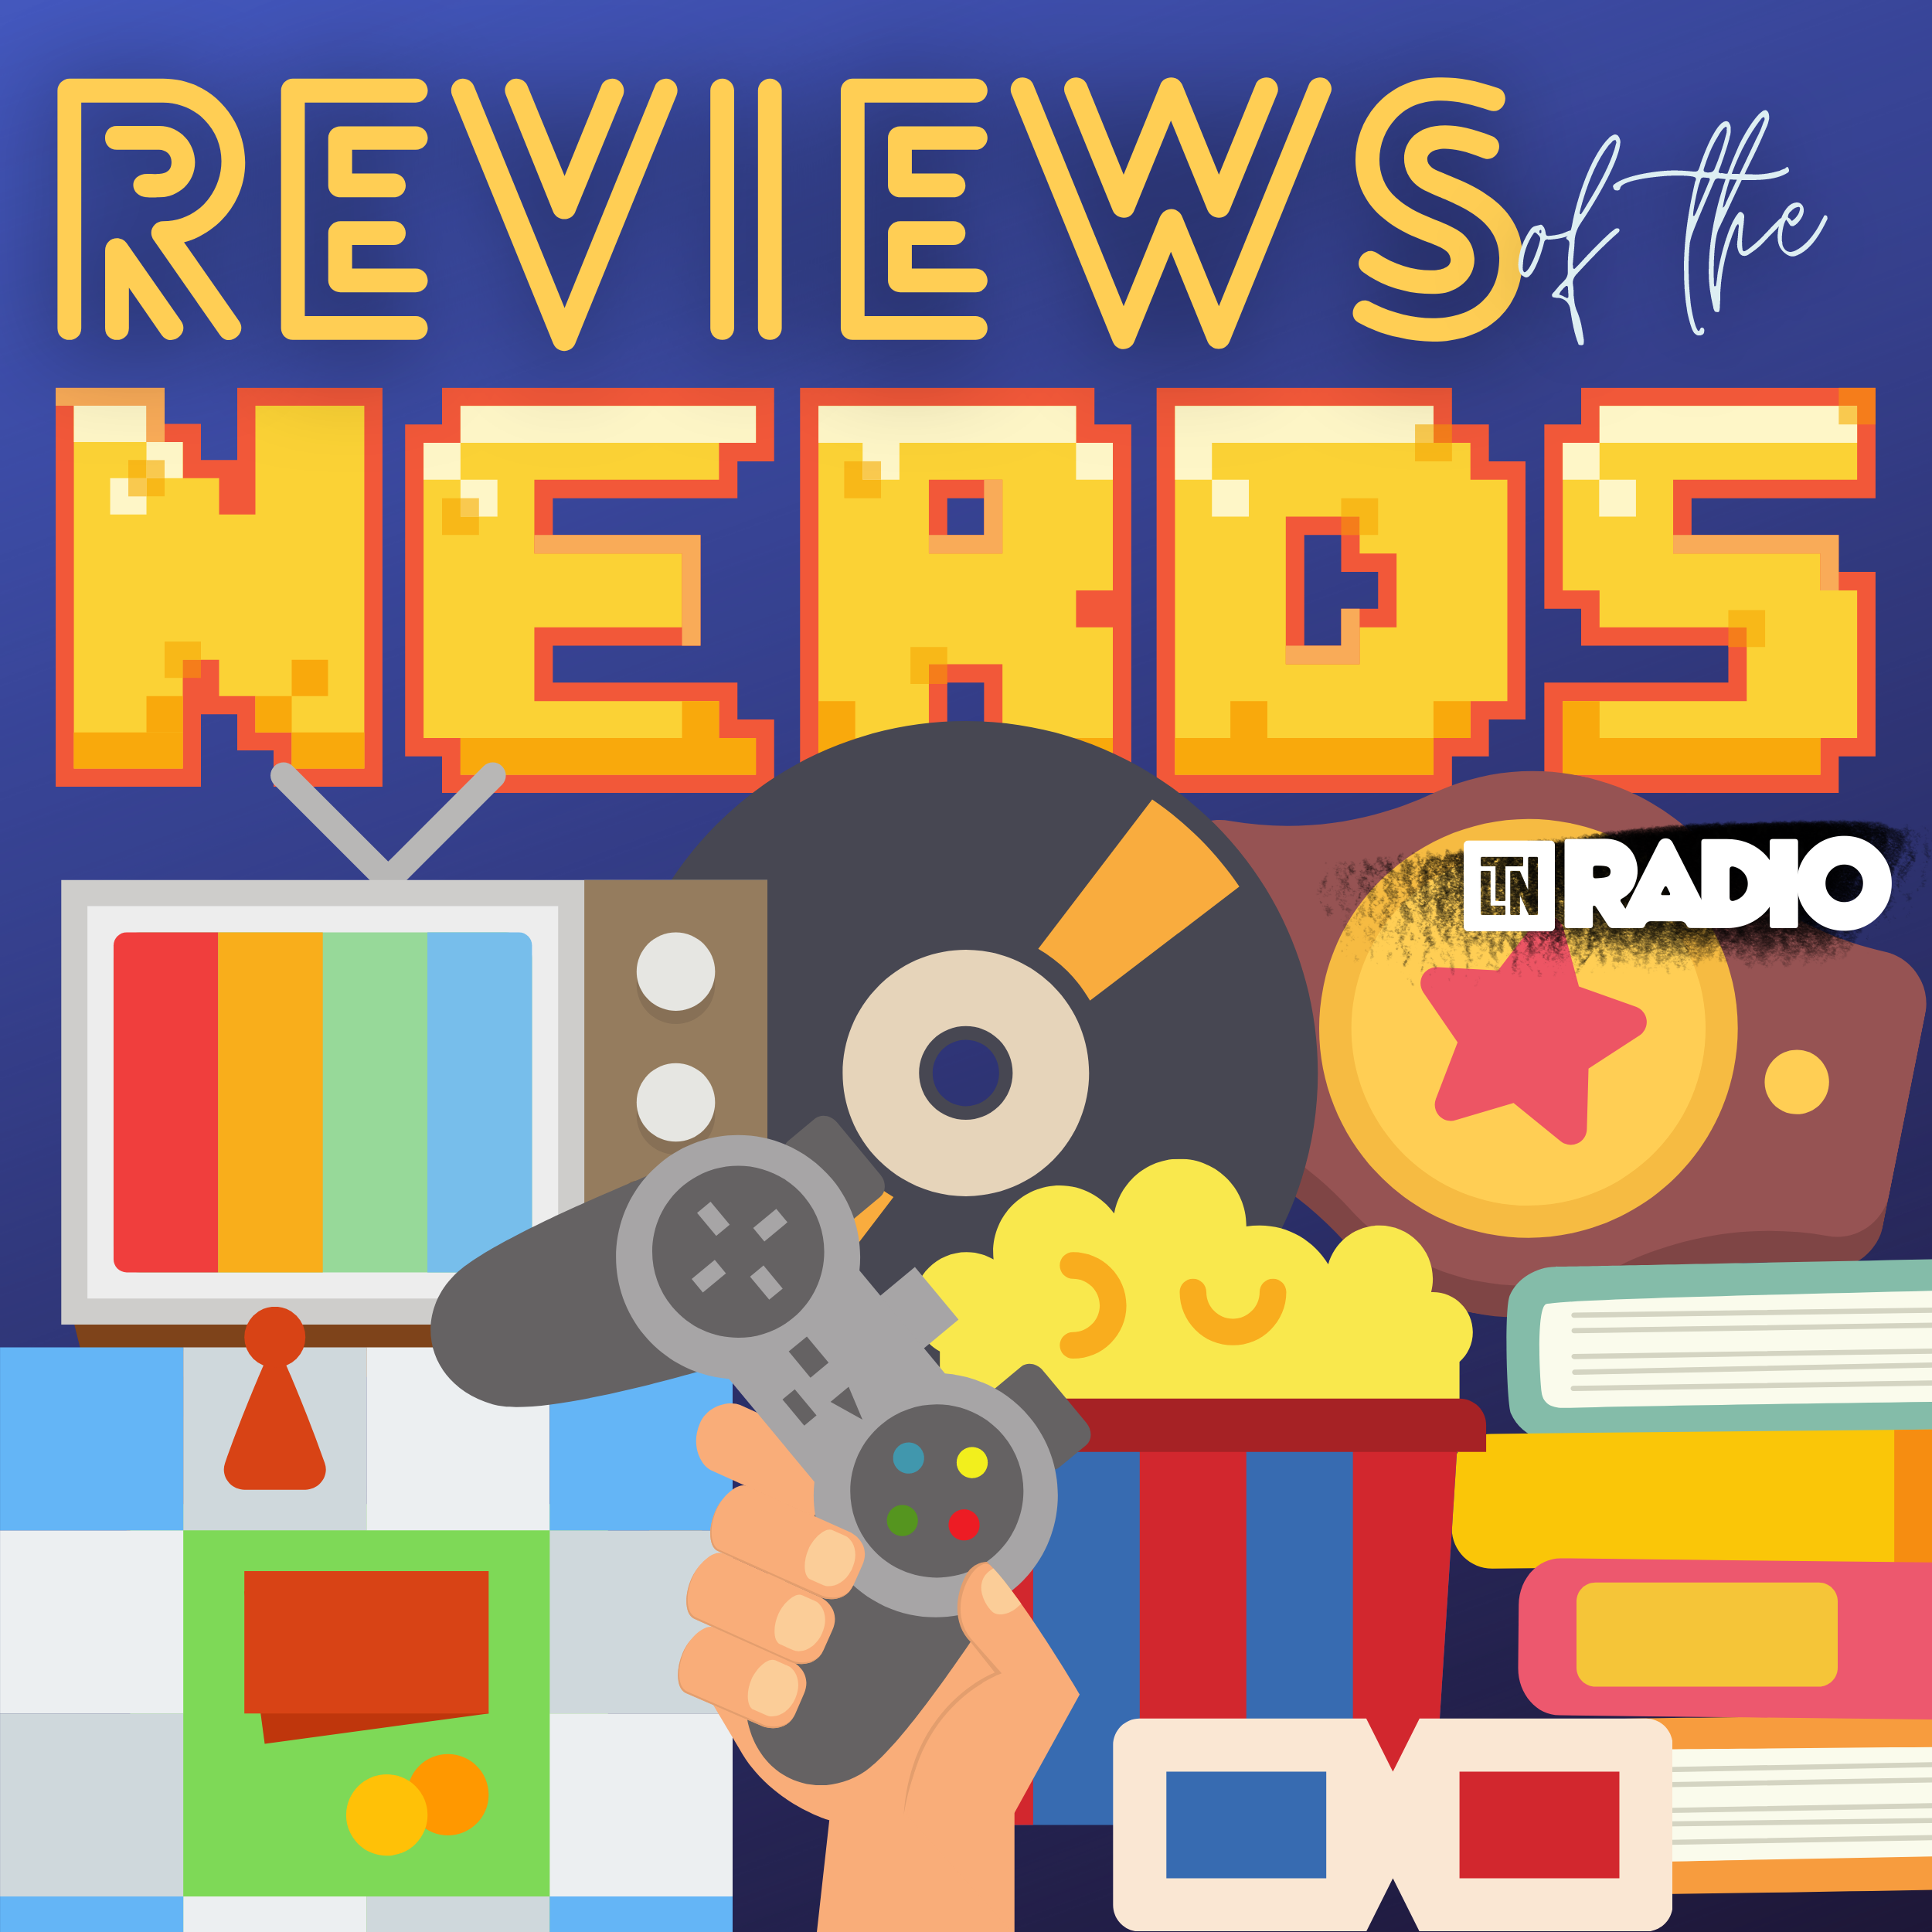 Reviews of the Nerds | Cosmic Encounters